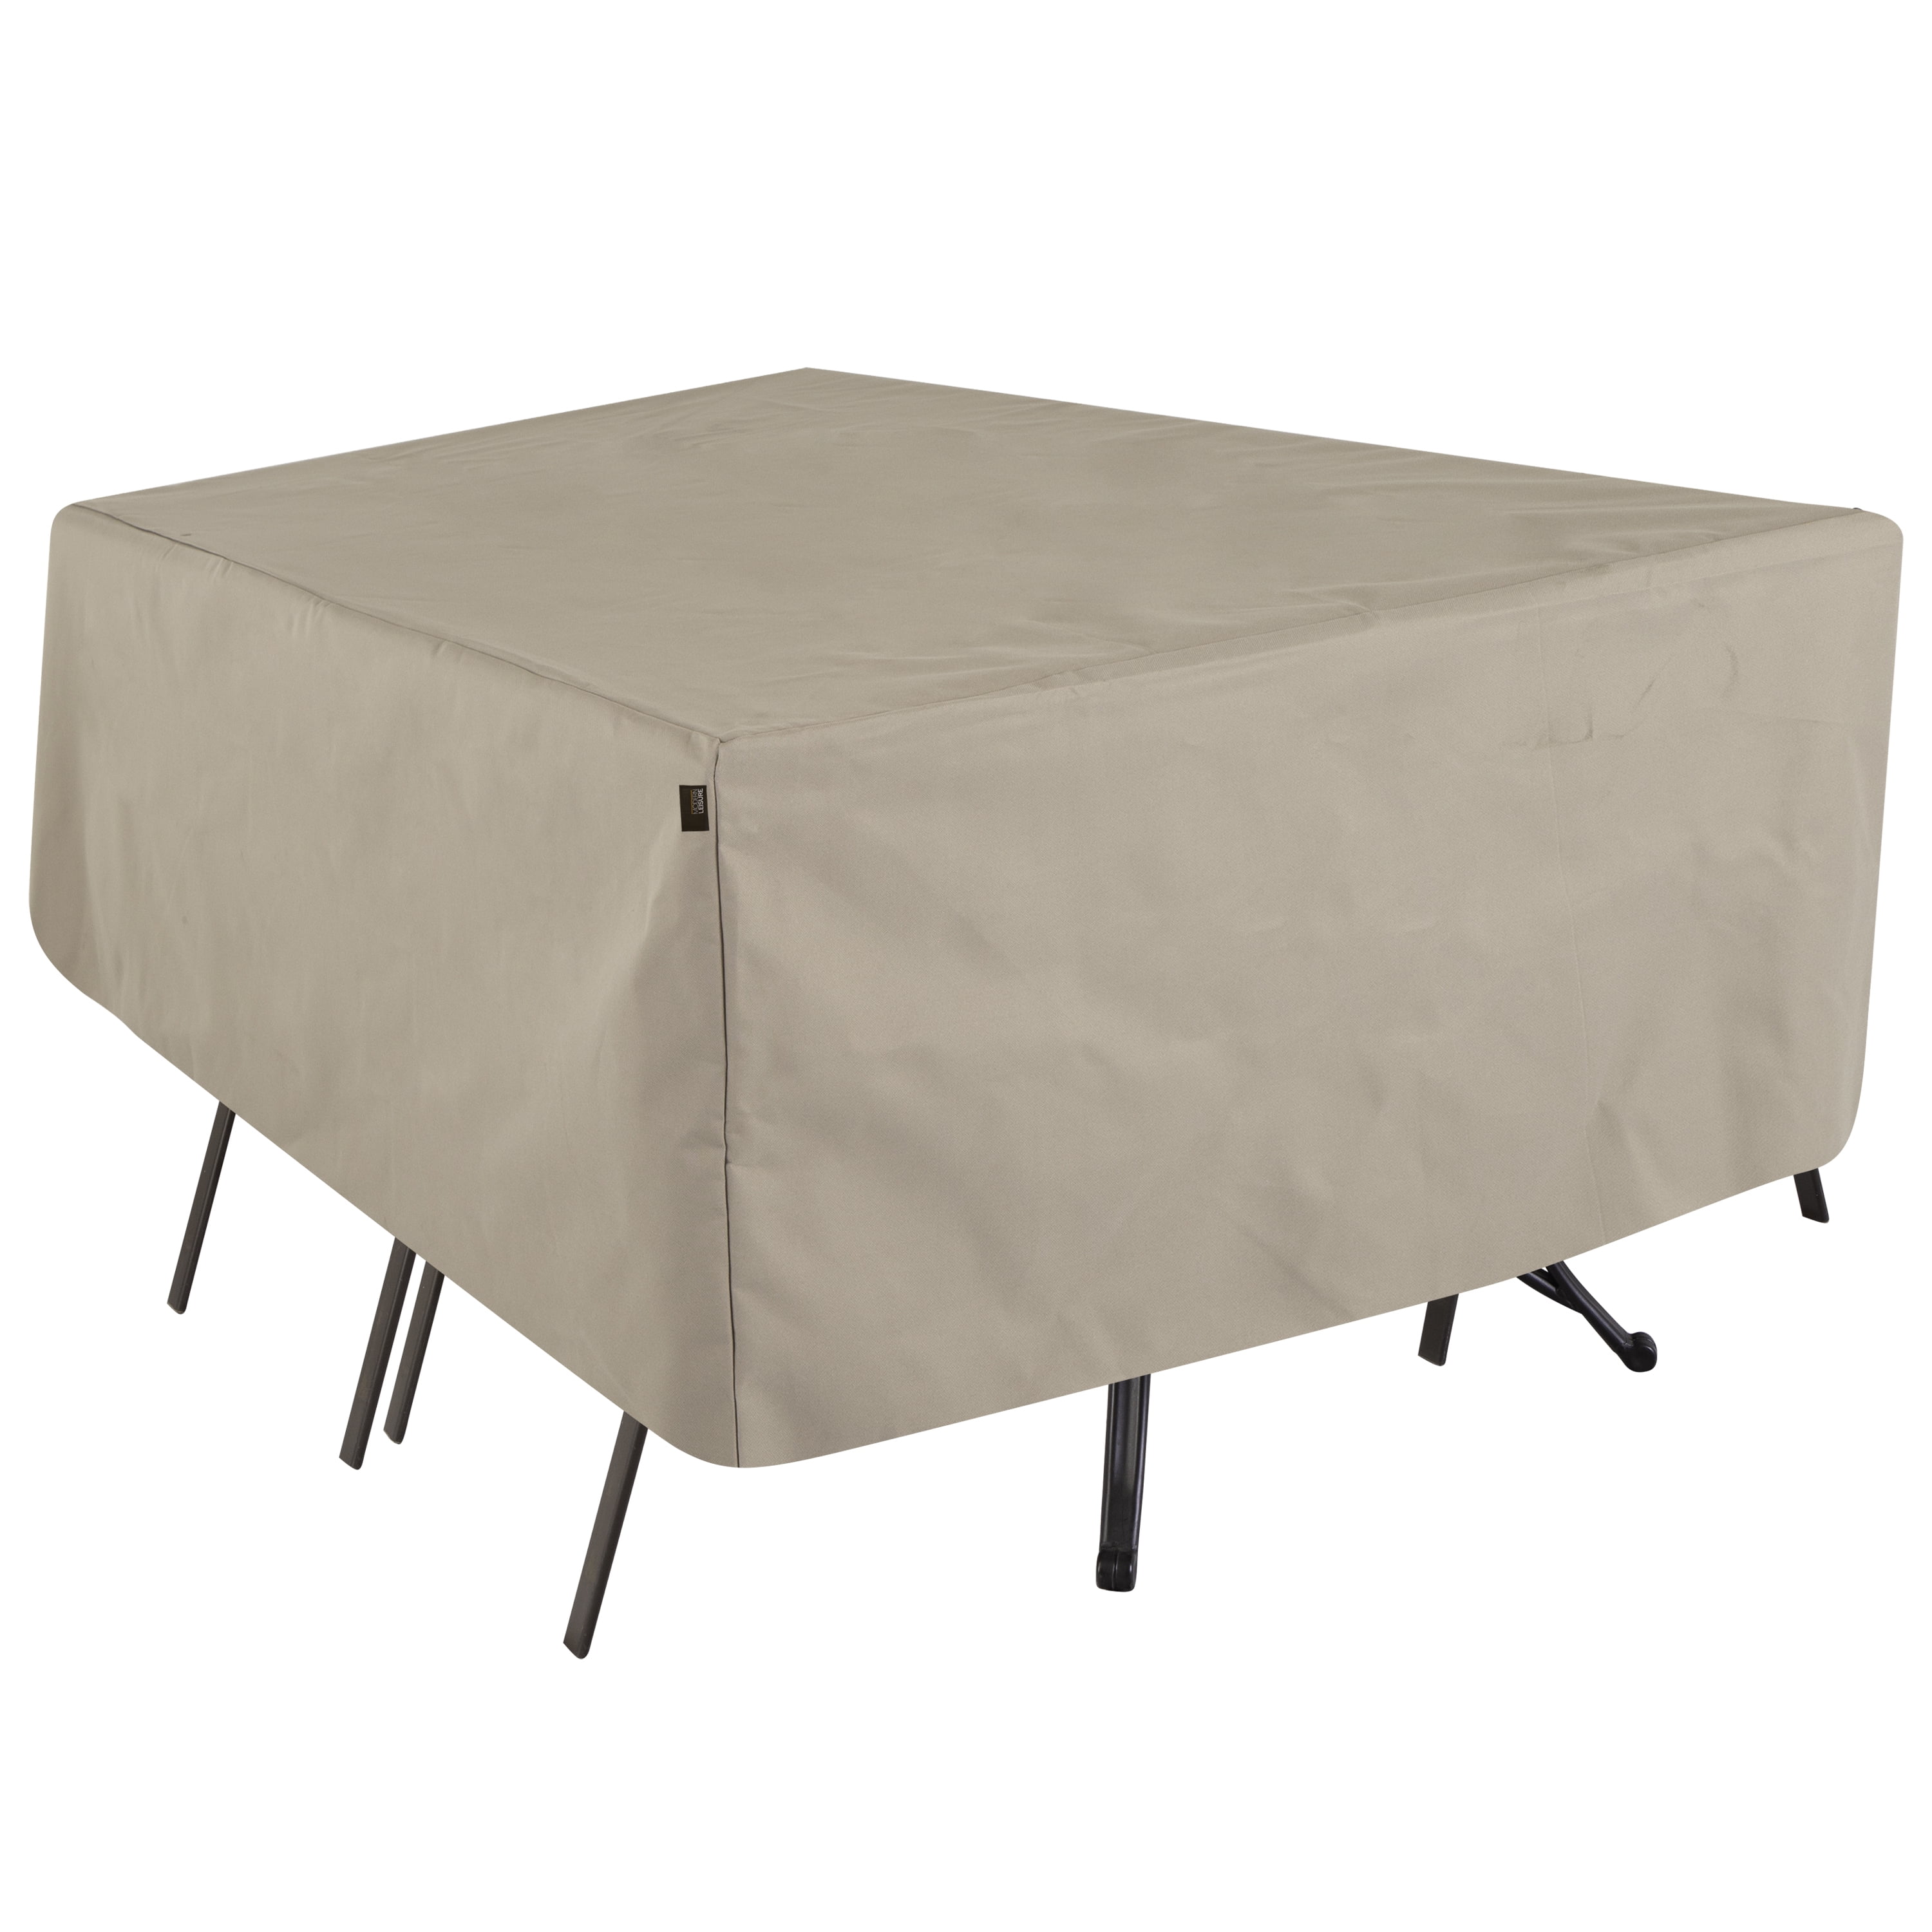 108 W x 50 D x 24 H, Beige with Air Pocket and Drawstring for Snug Fit Rectangle Table Cover with 100% UV & Weather Resistant Rectangular/Oval Outdoor Table Cover 12 Oz Waterproof 